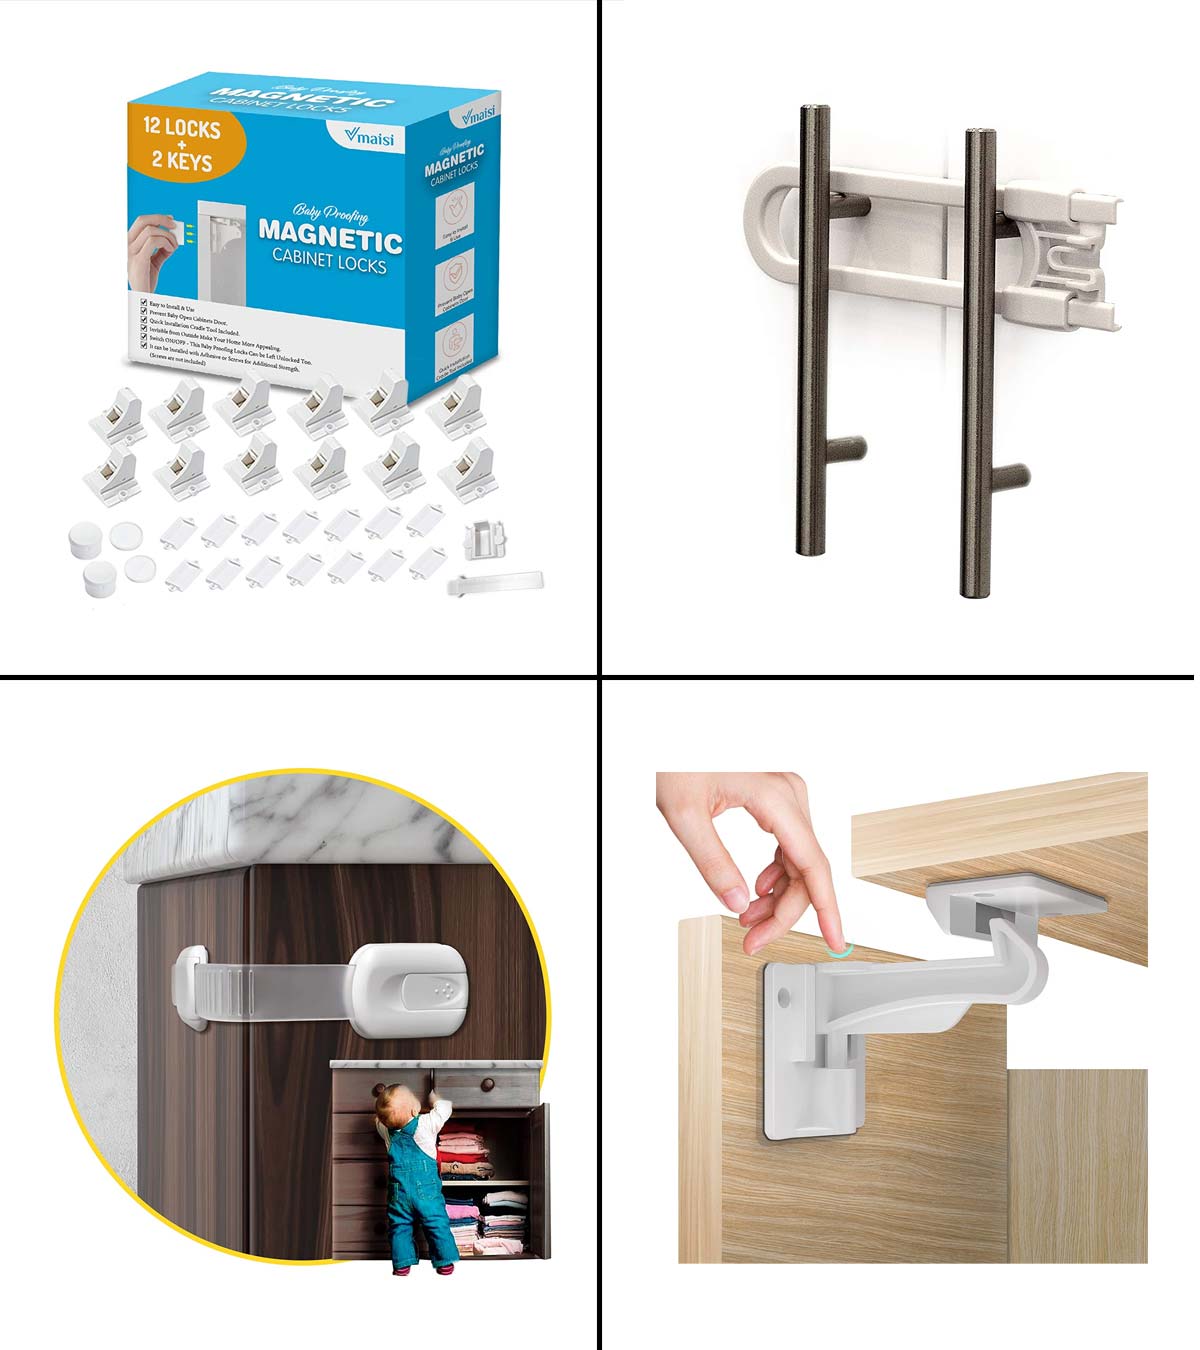 Invisible Lock Upgraded Child Safety Locks for Cabinets and Drawers with Strong 3M Adhesive No Drilling or Tools Required QT BABY Invisible Baby Proofing Cabinet Safety Latch Locks 10 Pack 